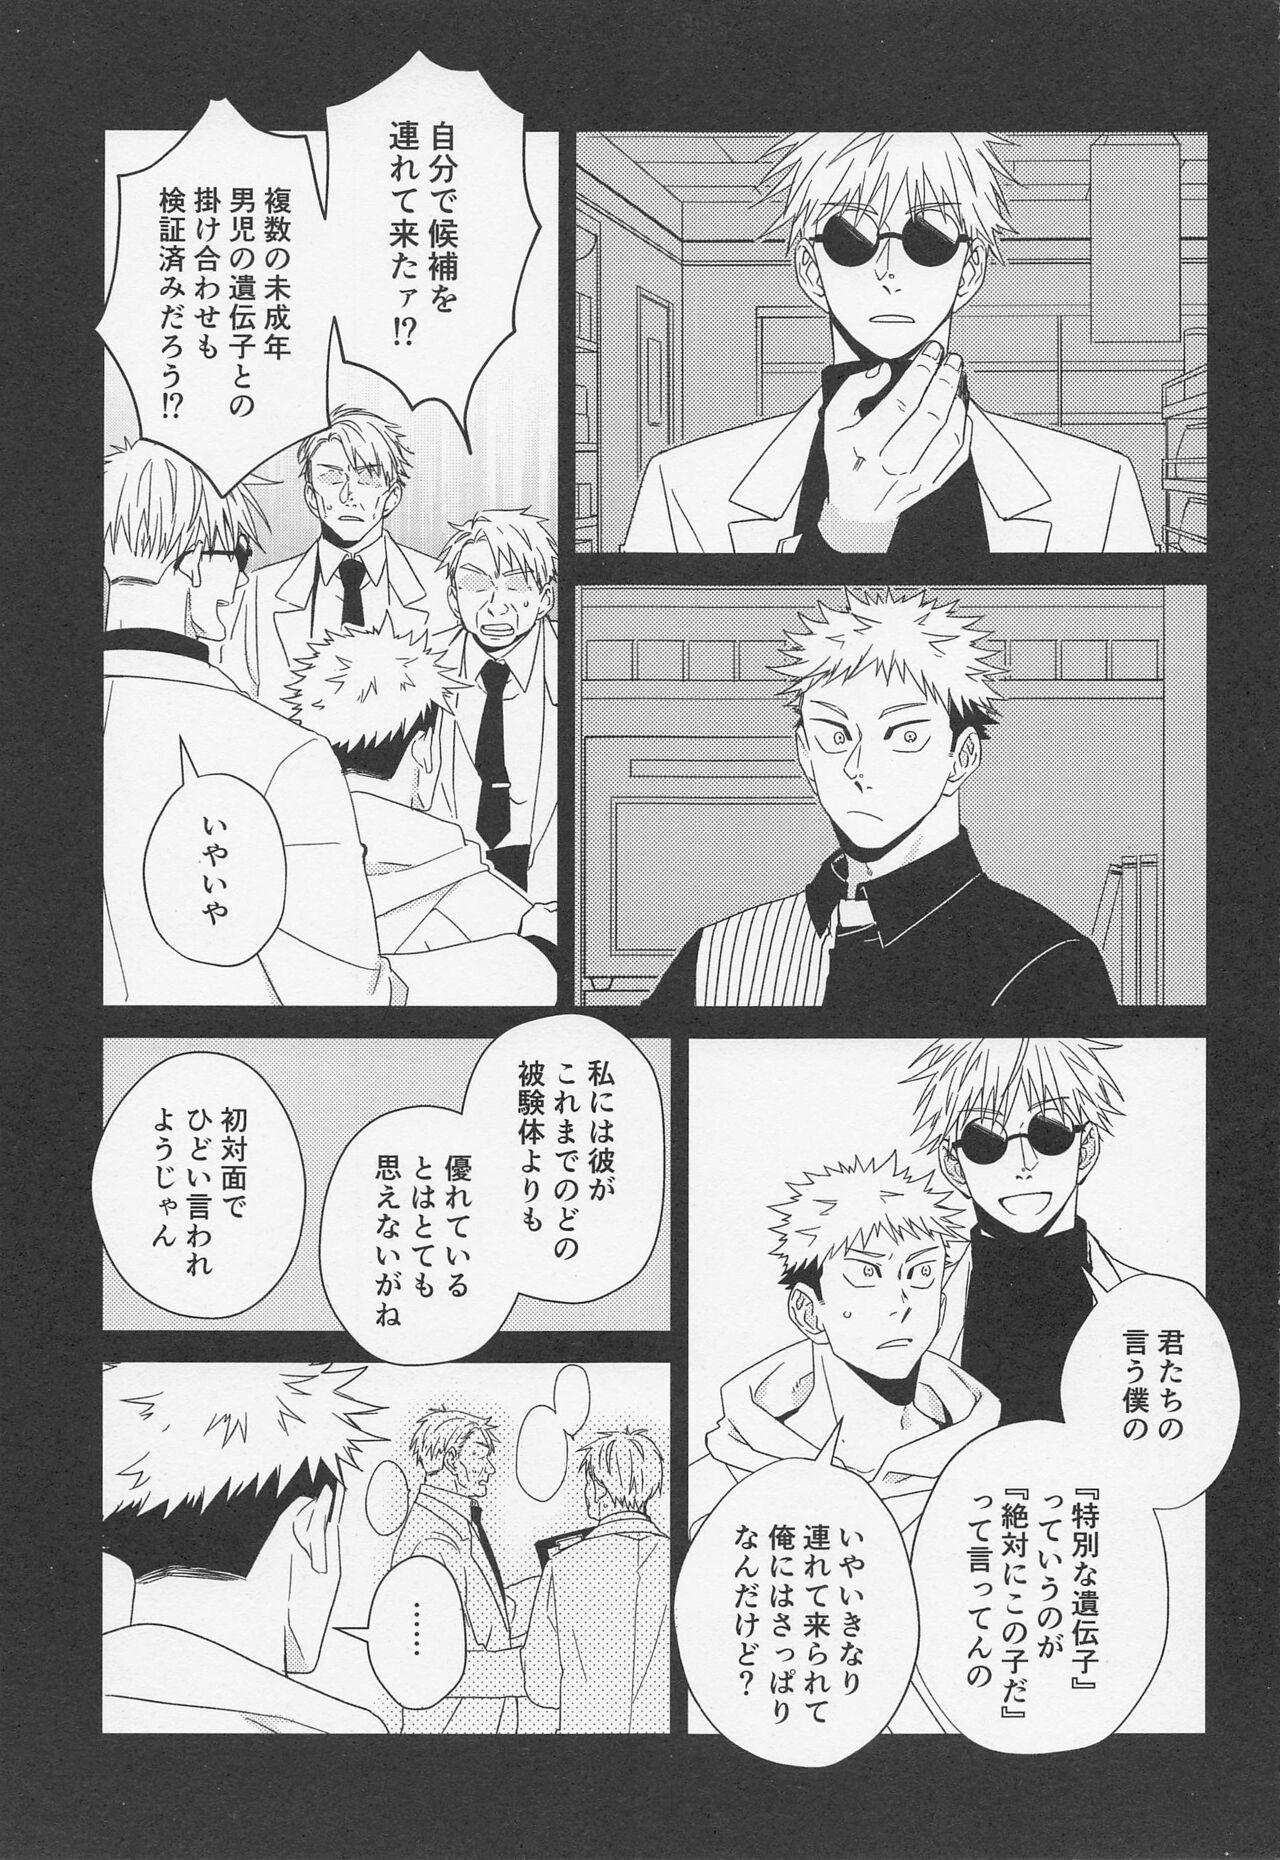 Old Young Fiction/Non-Fiction - Jujutsu kaisen Fucked - Page 6